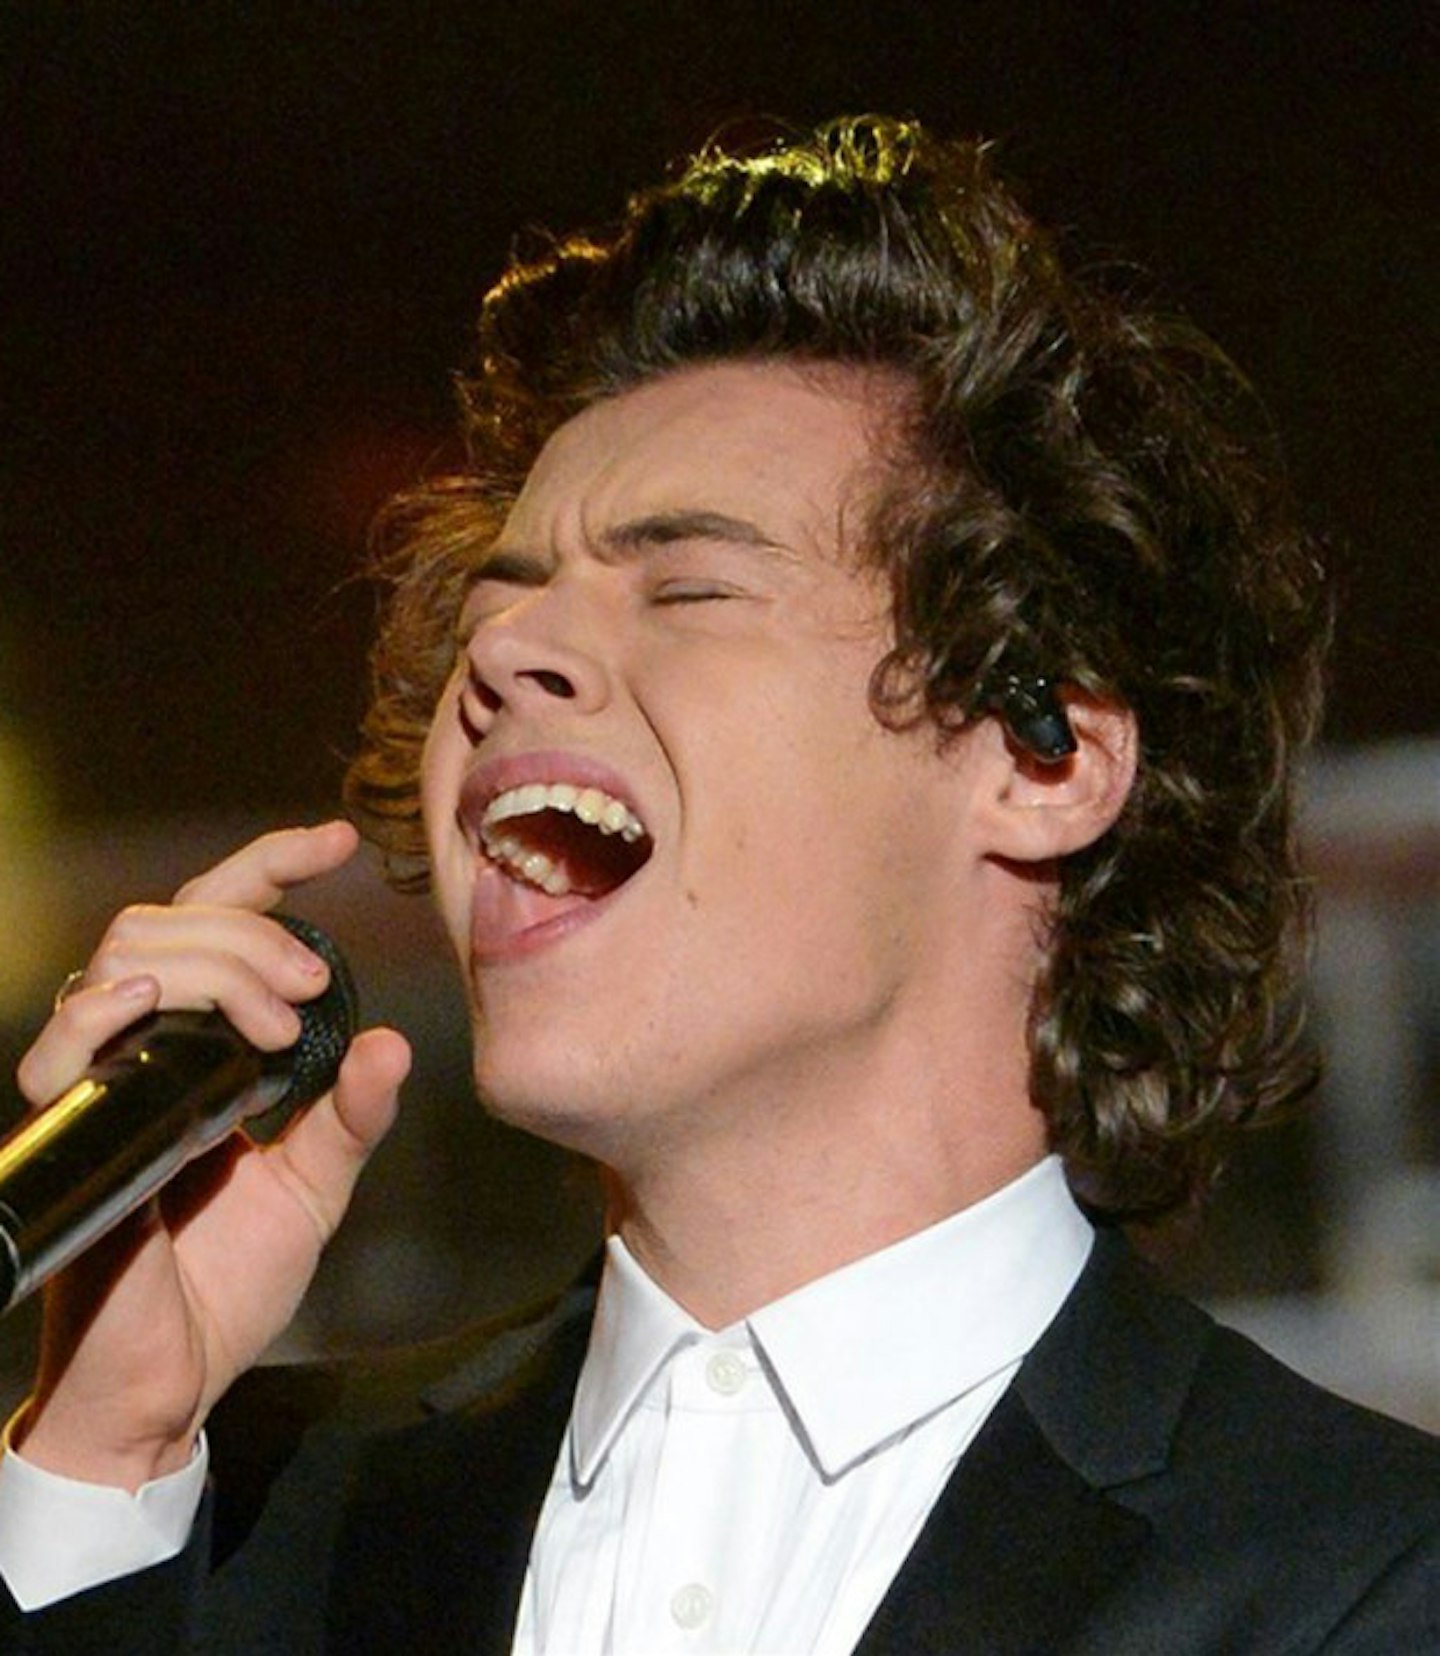 harry-styles-pulls-sex-face-picture